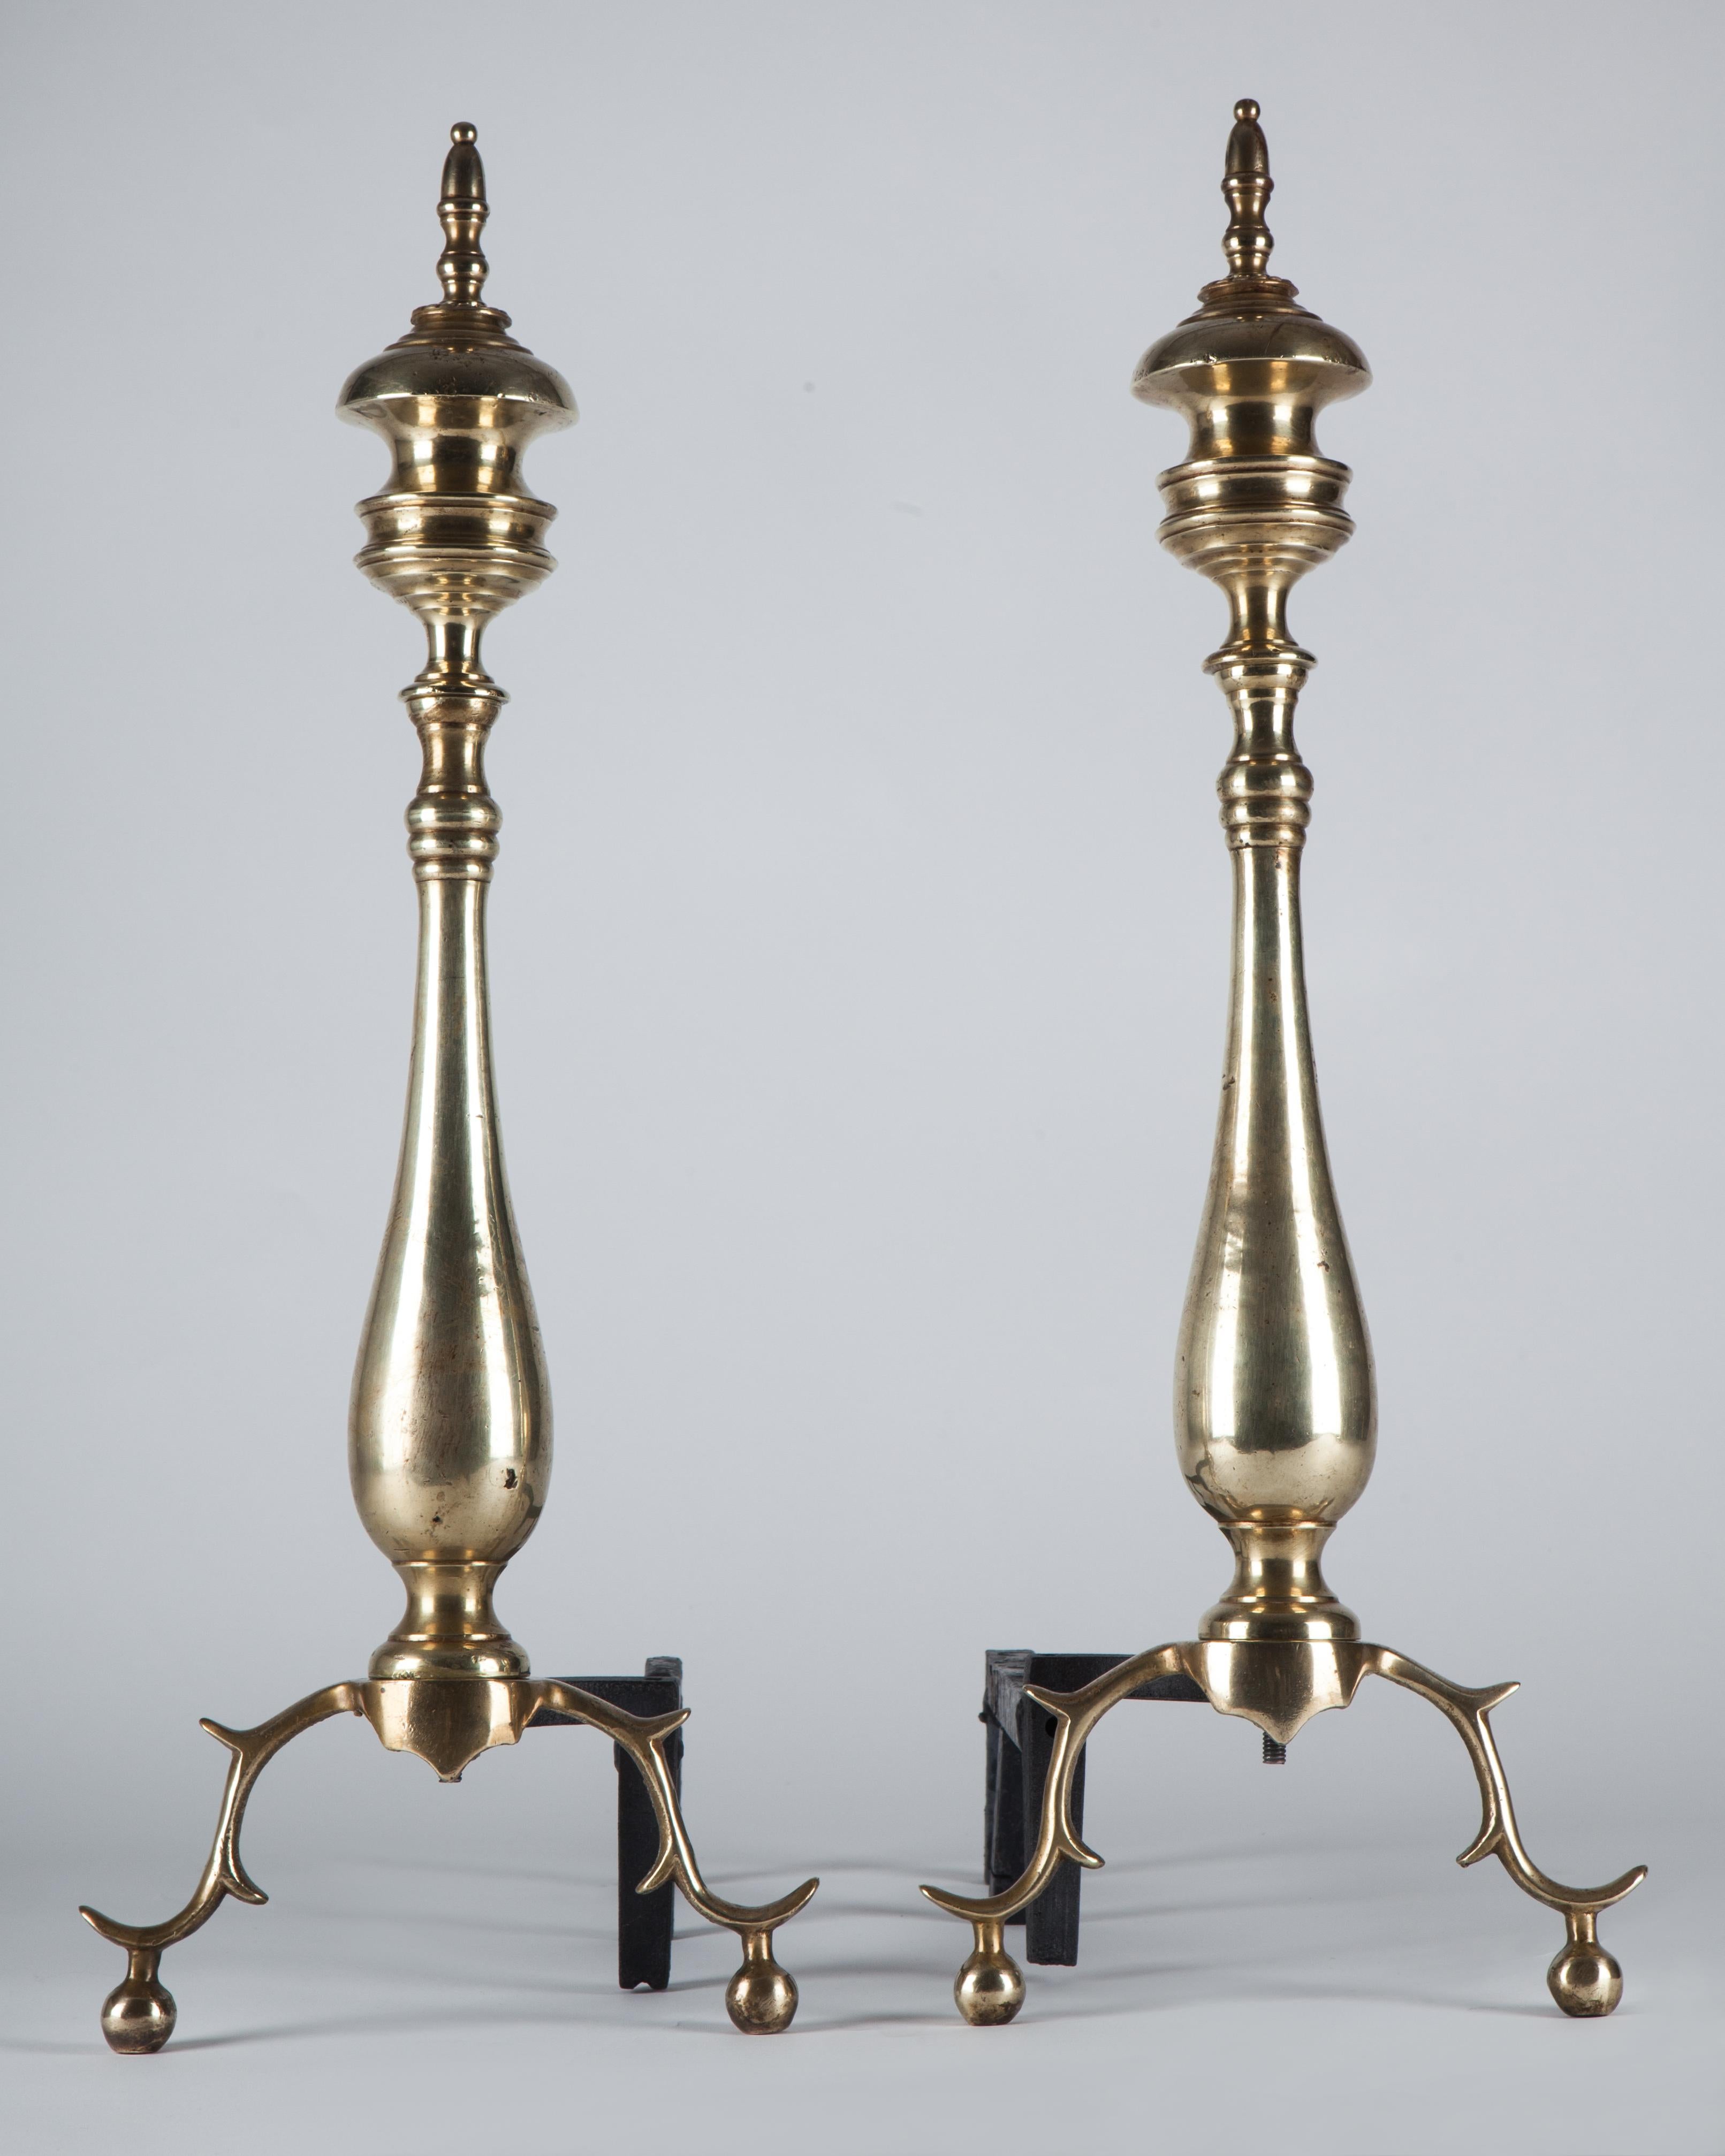 A pair of brass andirons with turned bodies and delicate cast legs terminating in ball feet. In an age-worn brass finish. Circa 1920.

Dimensions:
Overall: 23-1/2